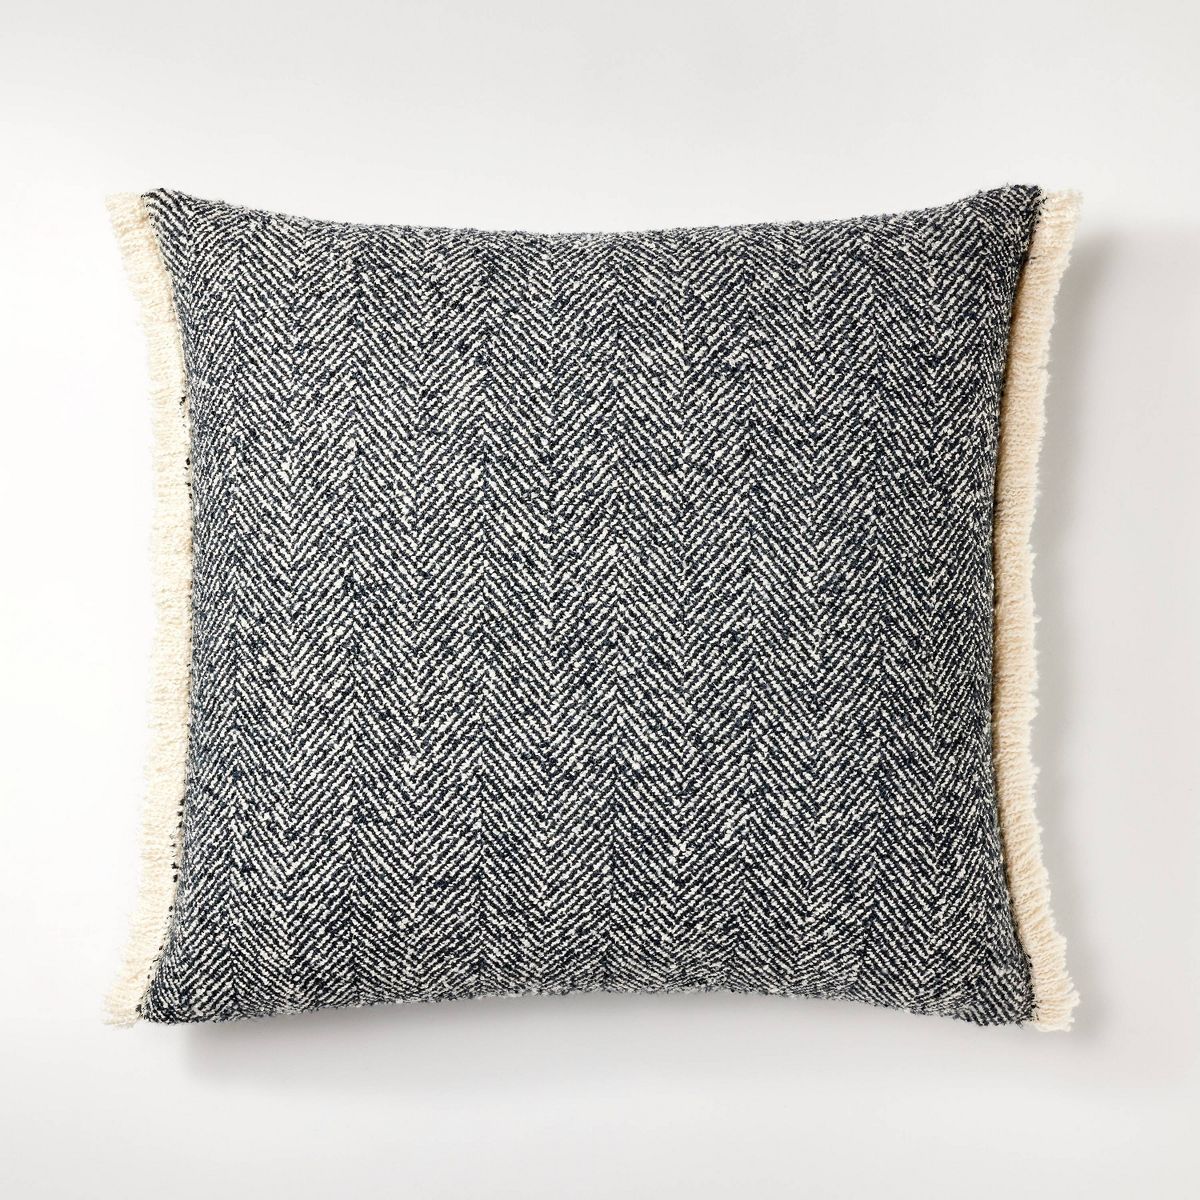 Herringbone with Frayed Edges Throw Pillow - Threshold™ designed with Studio McGee | Target